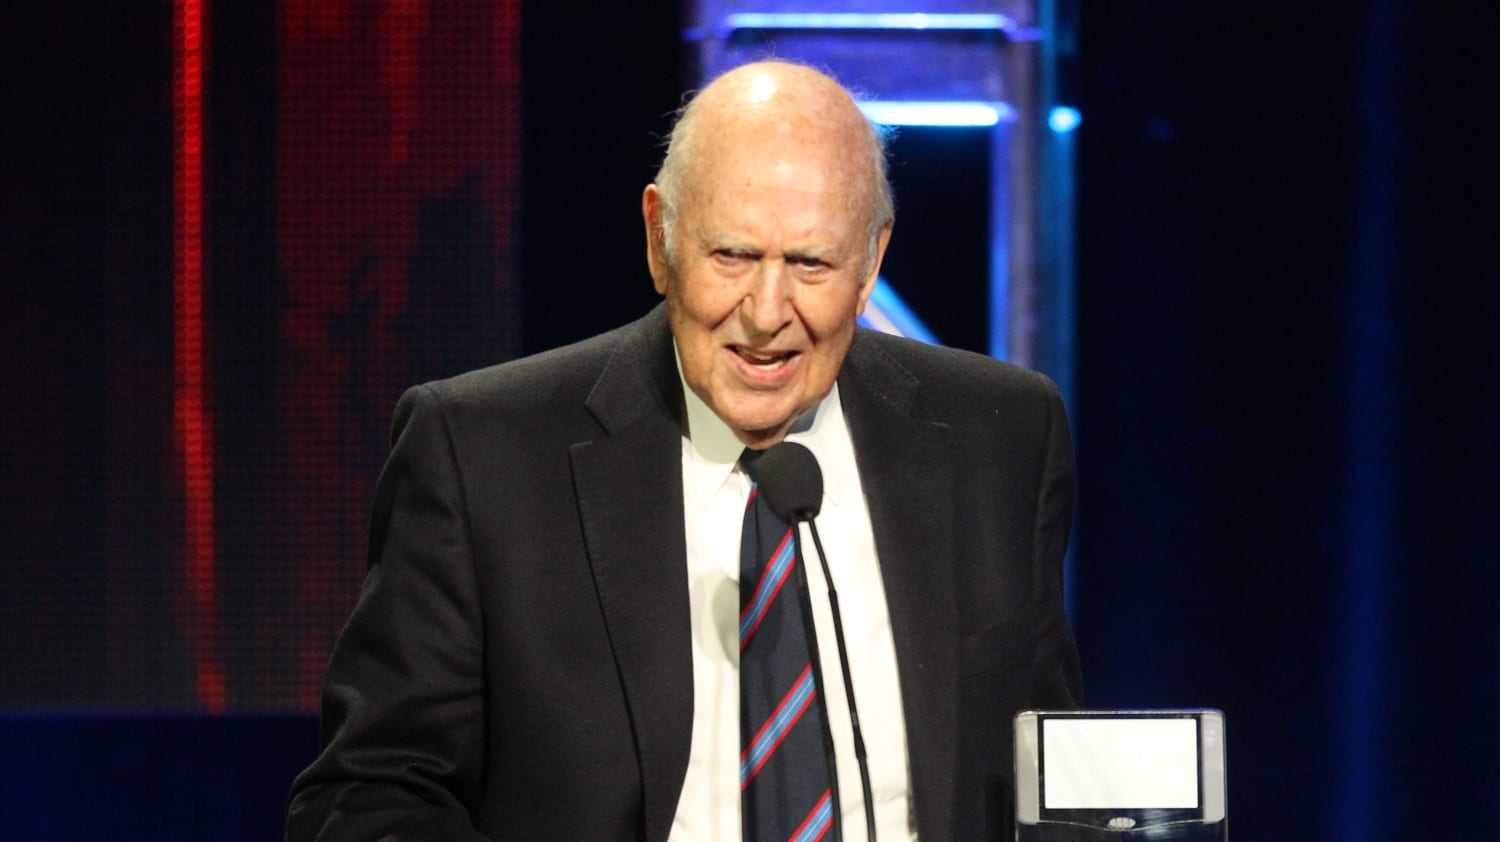 Carl Reiner would be disappointed he didn't live 'to see Trump's eviction,' his daughter tweets